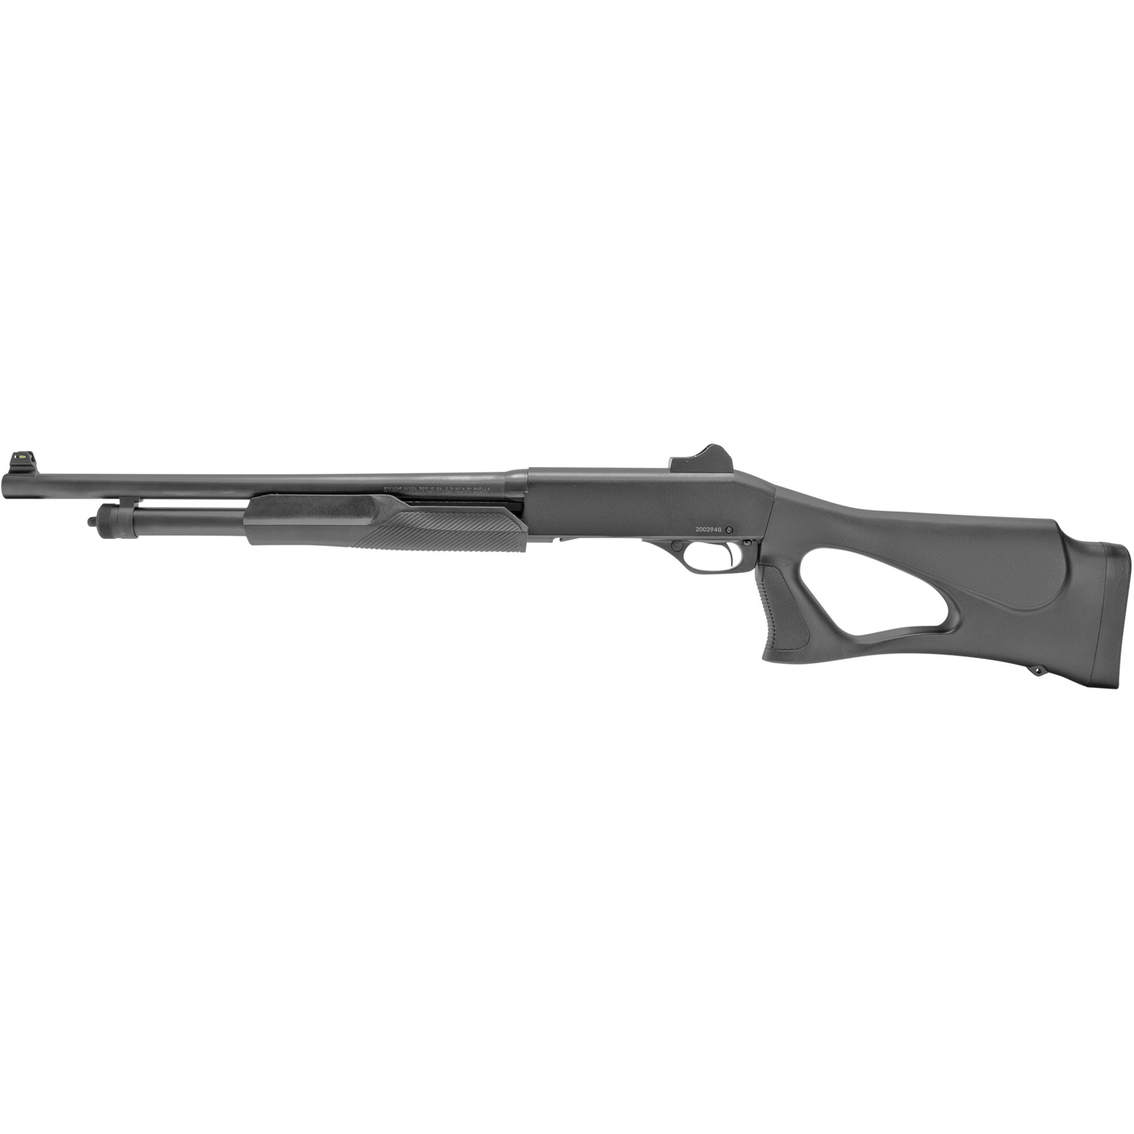 Stevens 320 Security Thumbhole 12Ga 3 in. Chamber 18.5 in. Barrel 5Rds Ghost Ring - Image 2 of 2